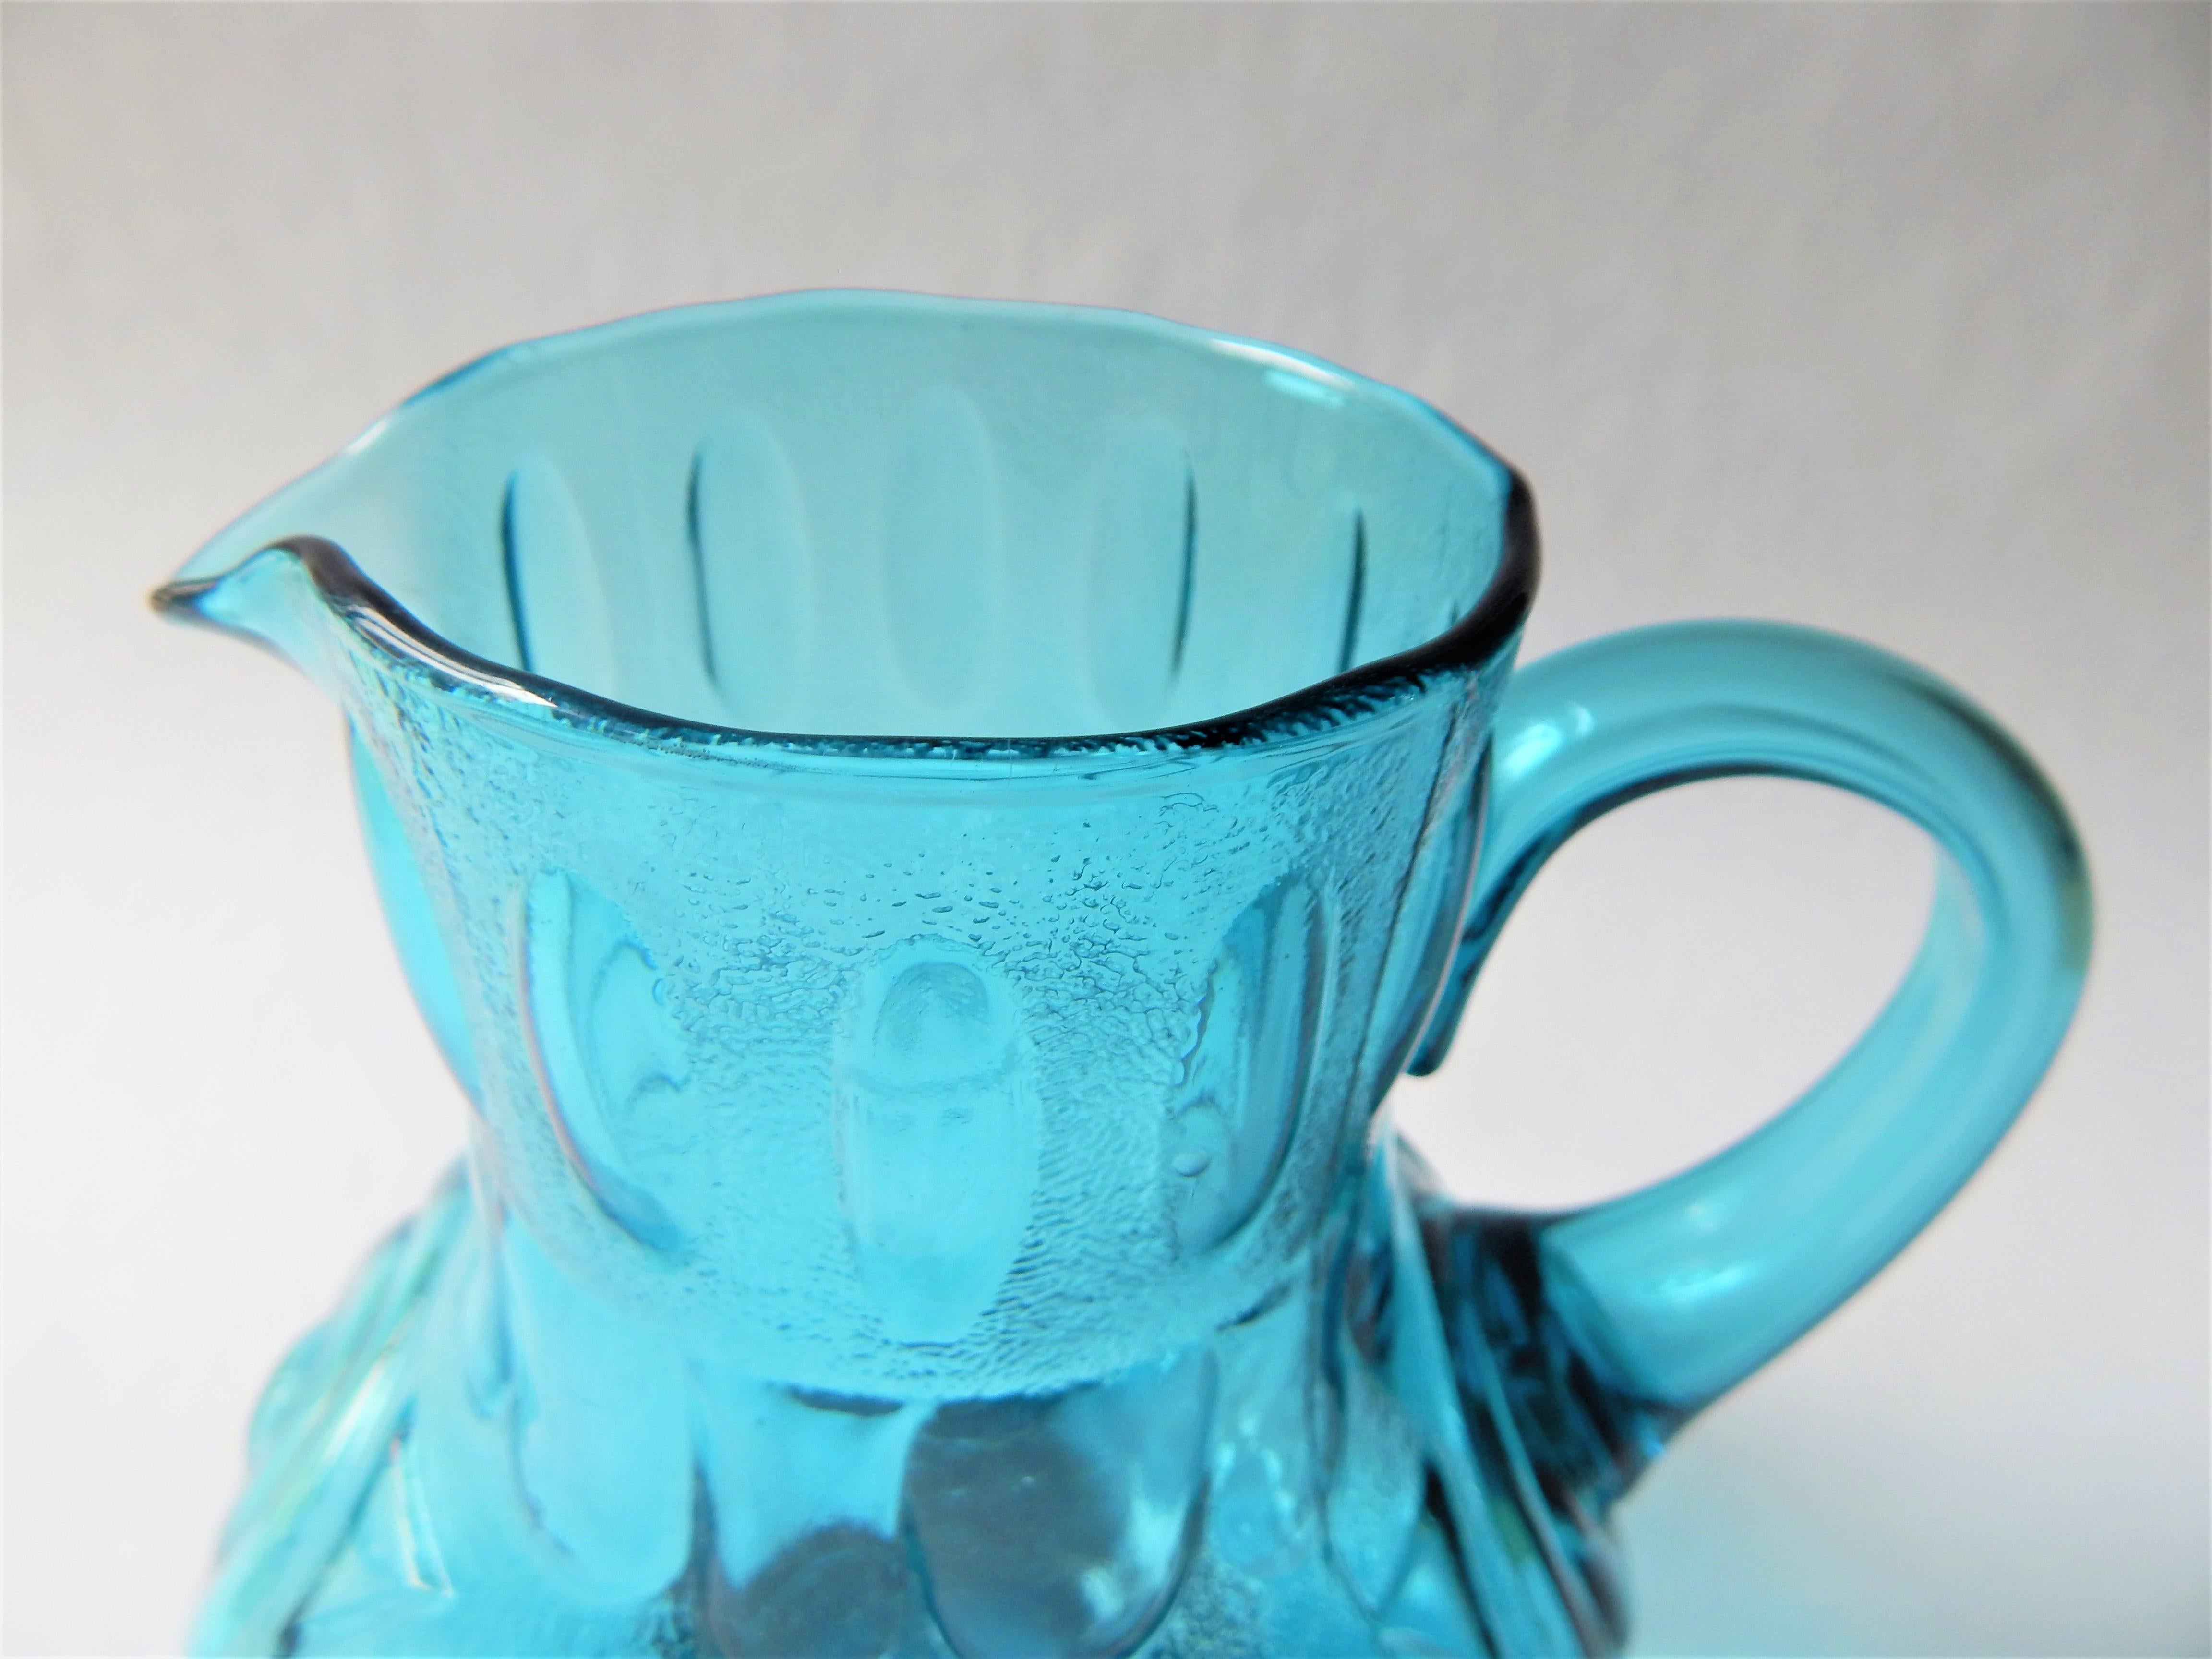 1960s Blue Glass Pitcher with Abstract Design. Marked Made in Italy. 
Excellent Condition. 